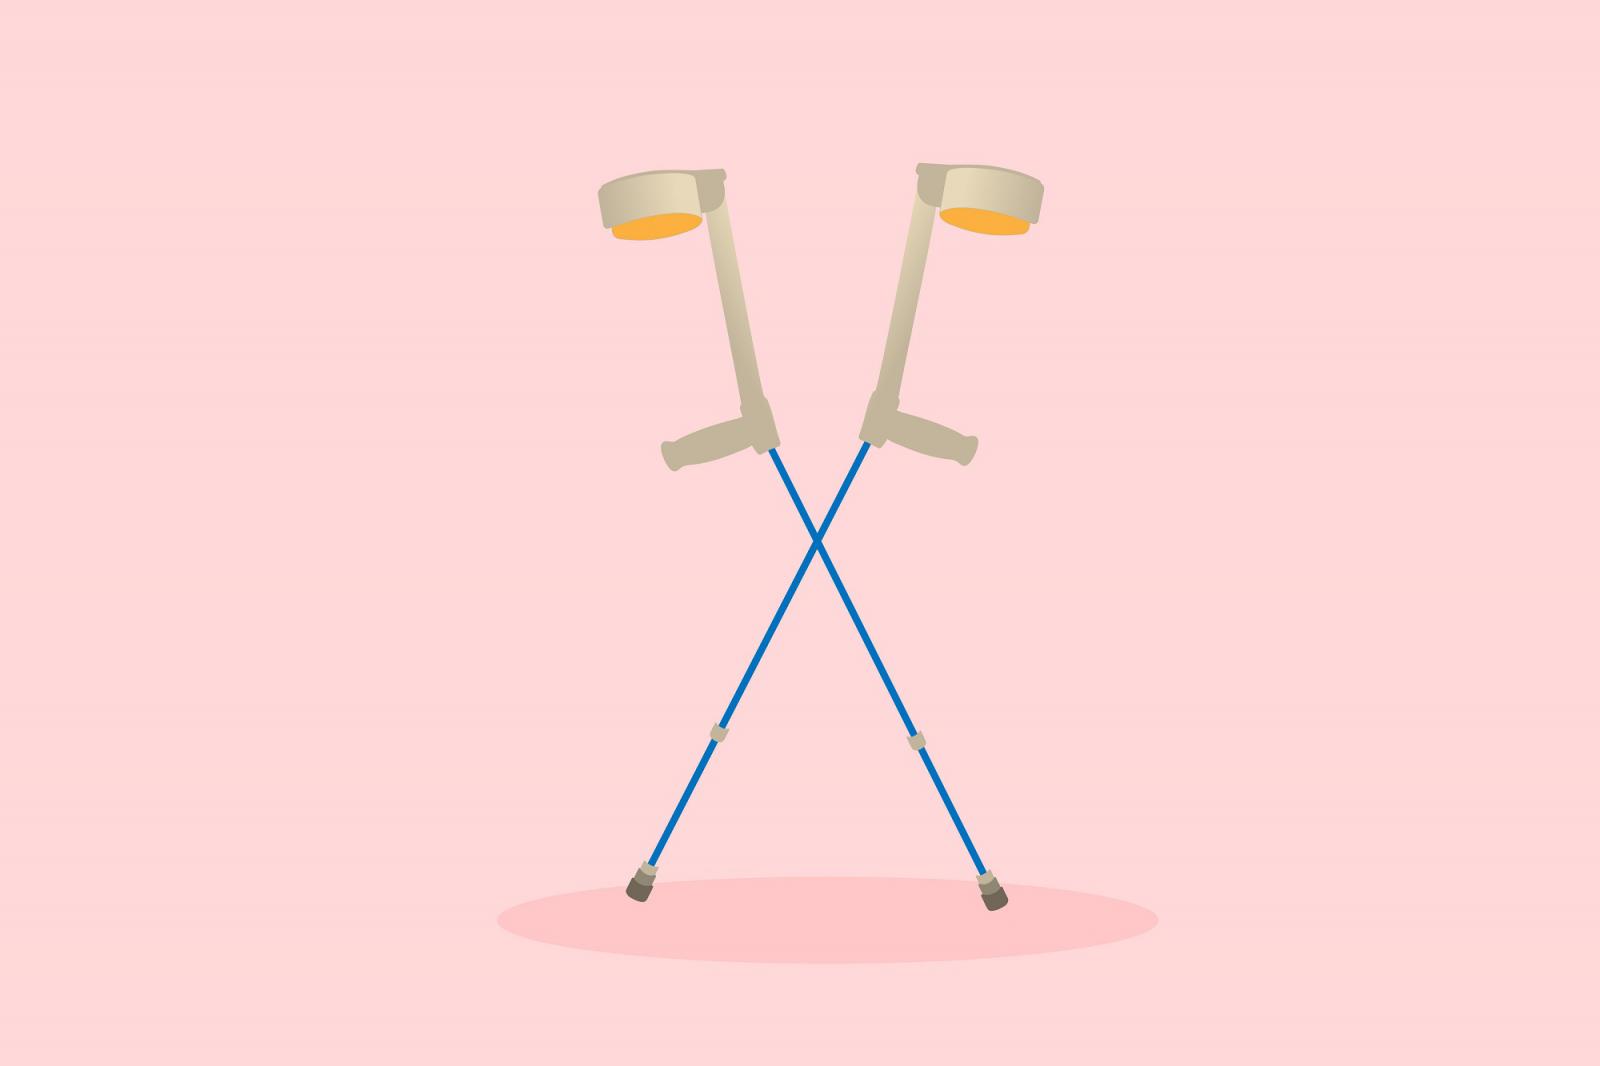 Image of crutches.